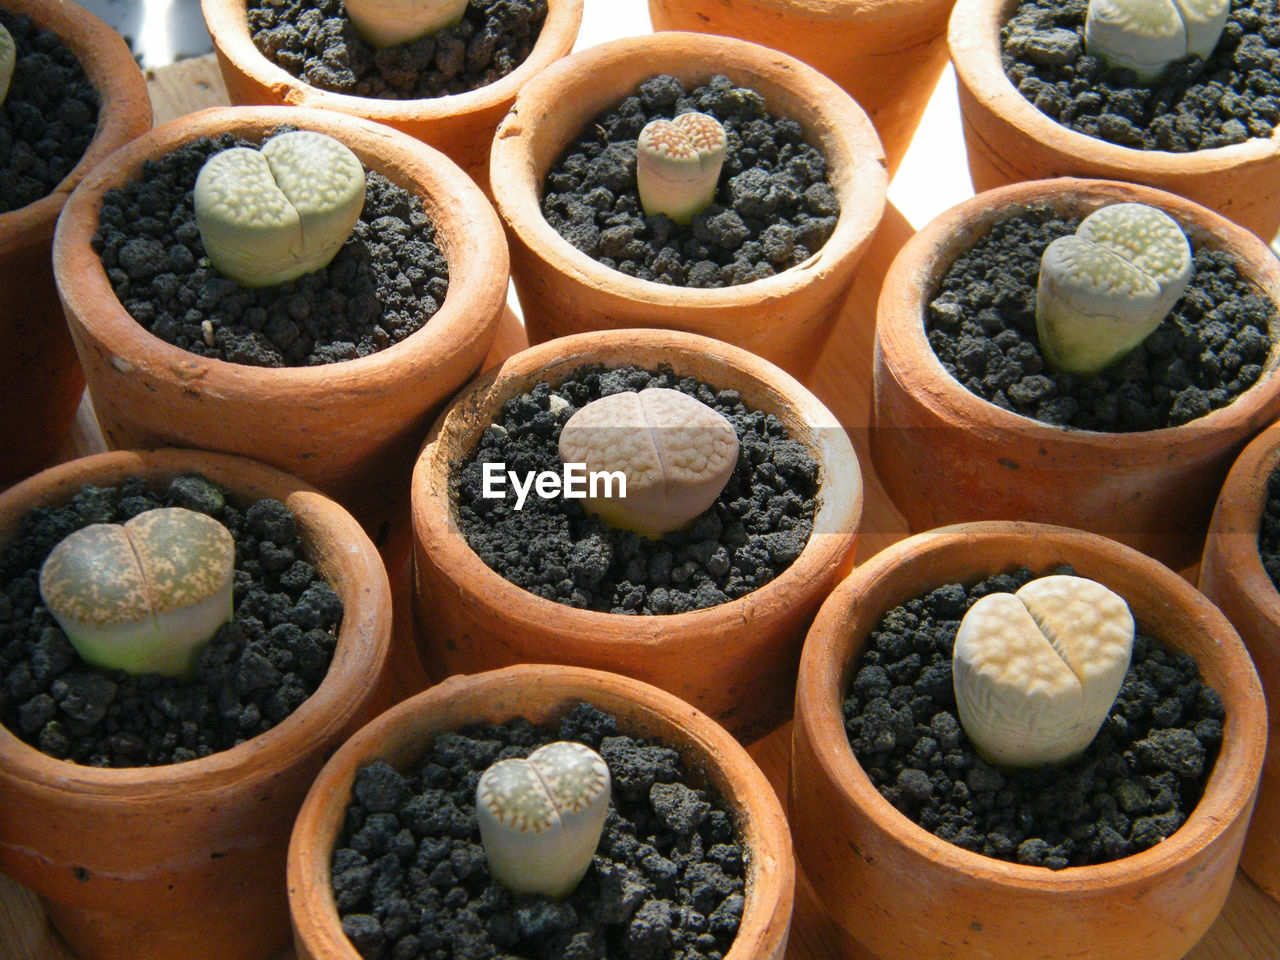 Lithops at the plant market